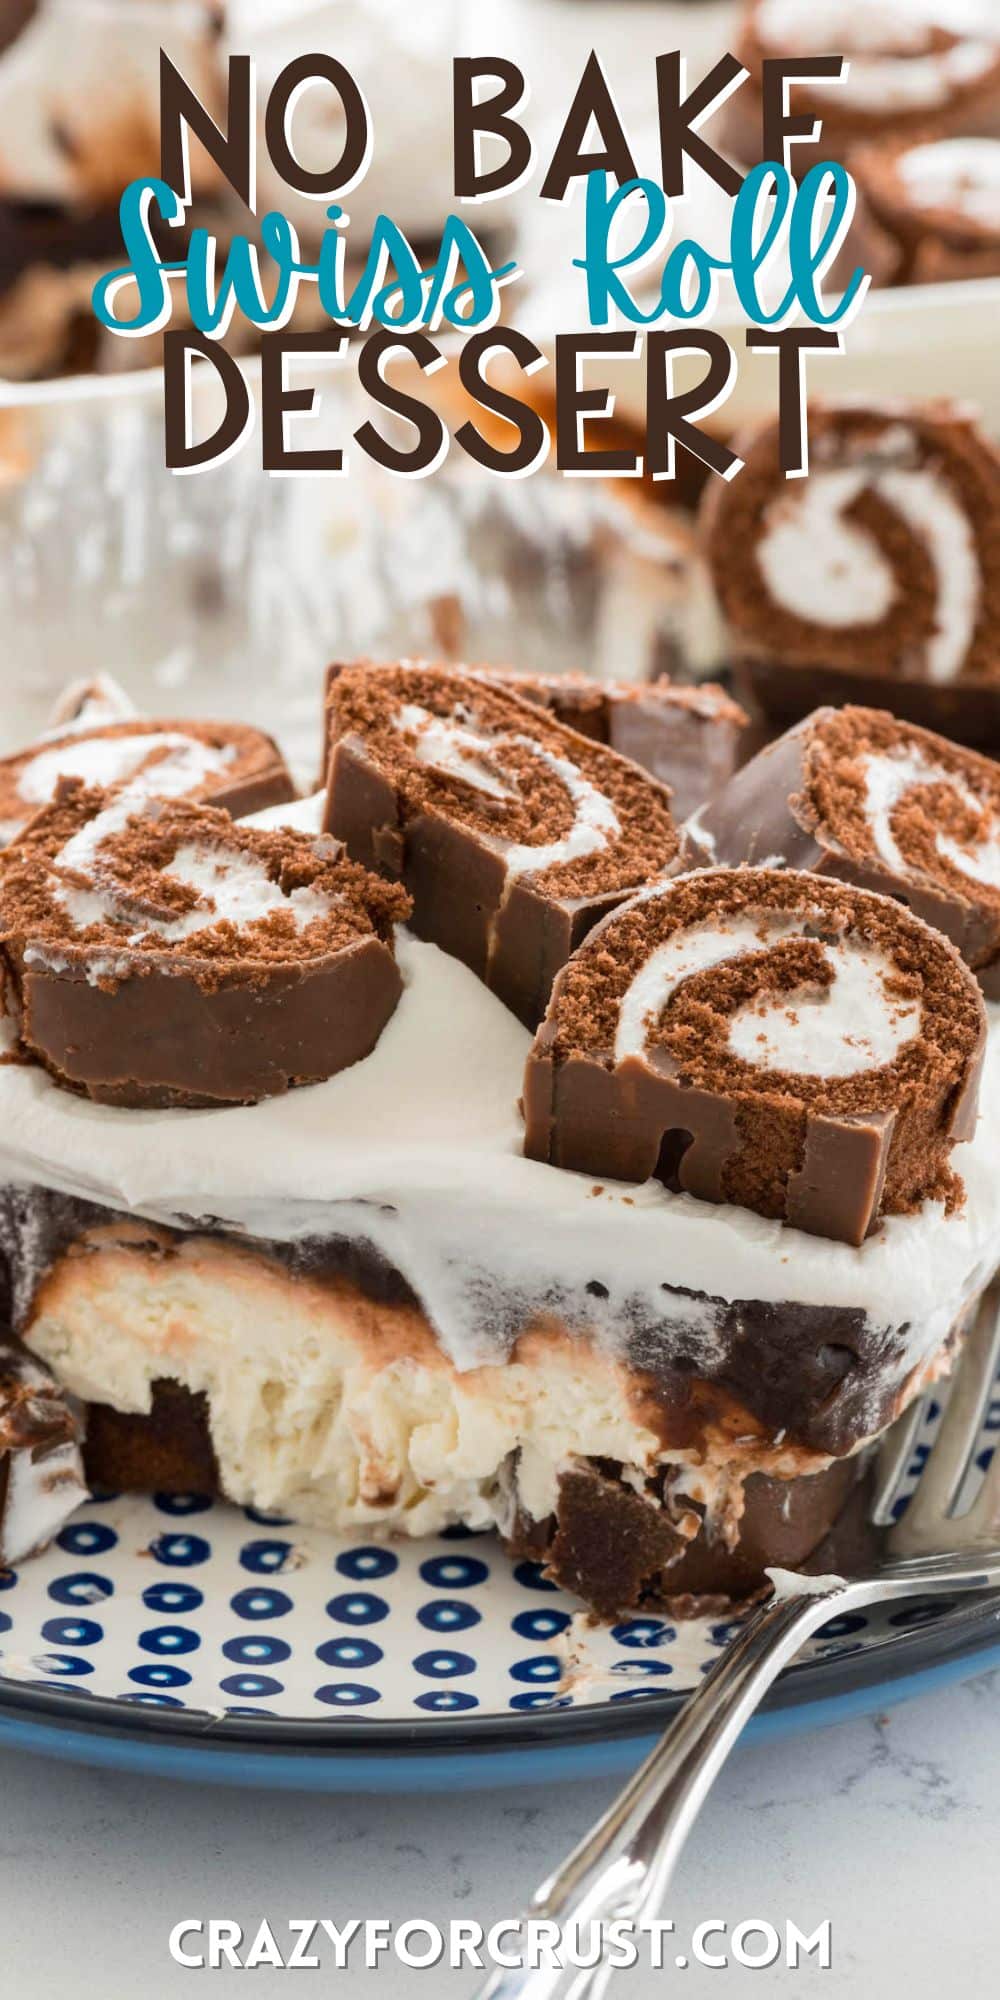 Swiss roll dessert on a plate next to a fork with sliced Swiss rolls on top with words on the image.